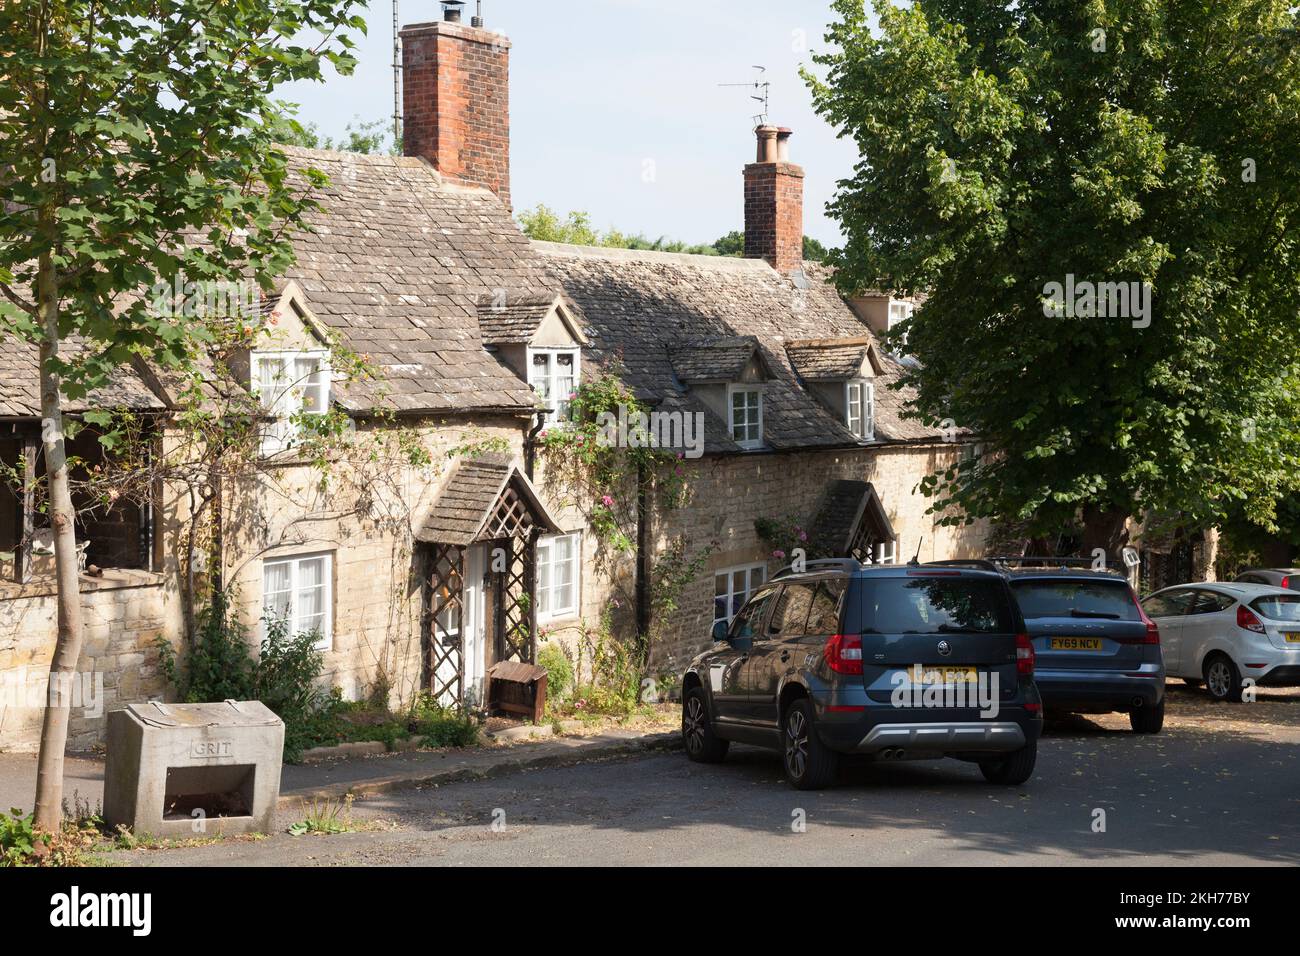 Cottages in Vineyard Street, Winchcombe, Glouchestershire Stock Photo